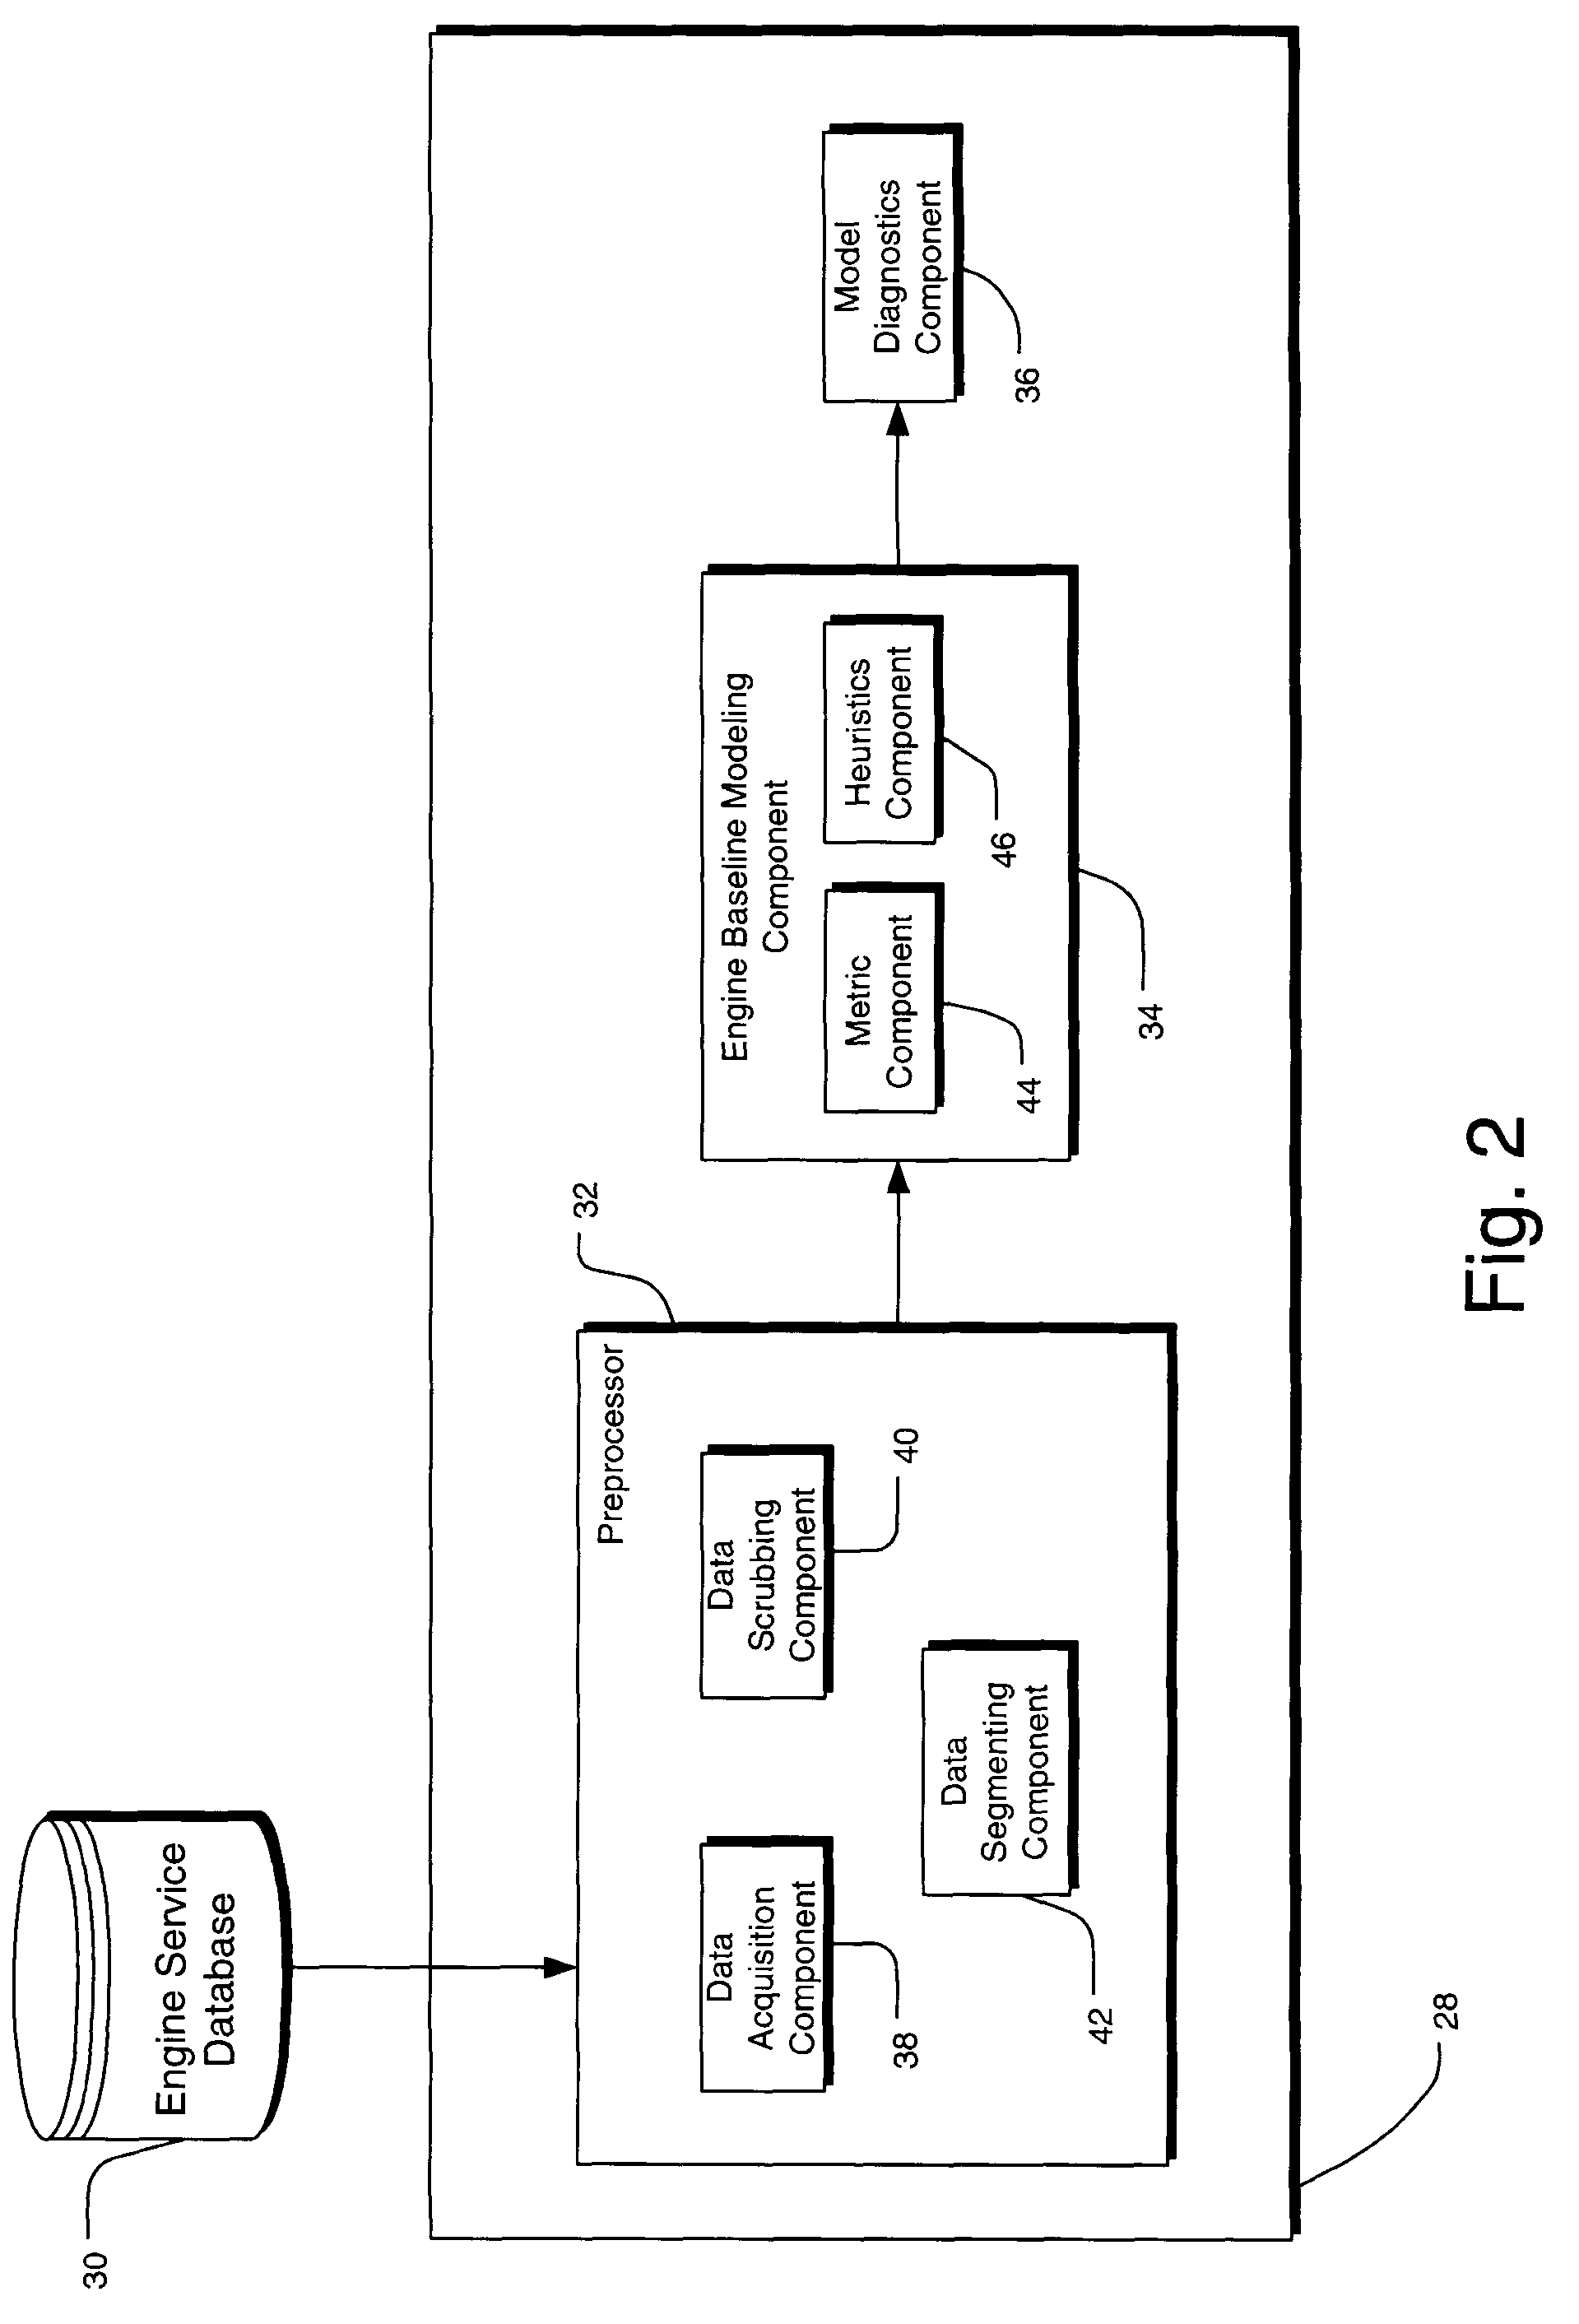 System and method for diagnosing faults utilizing baseline modeling techniques